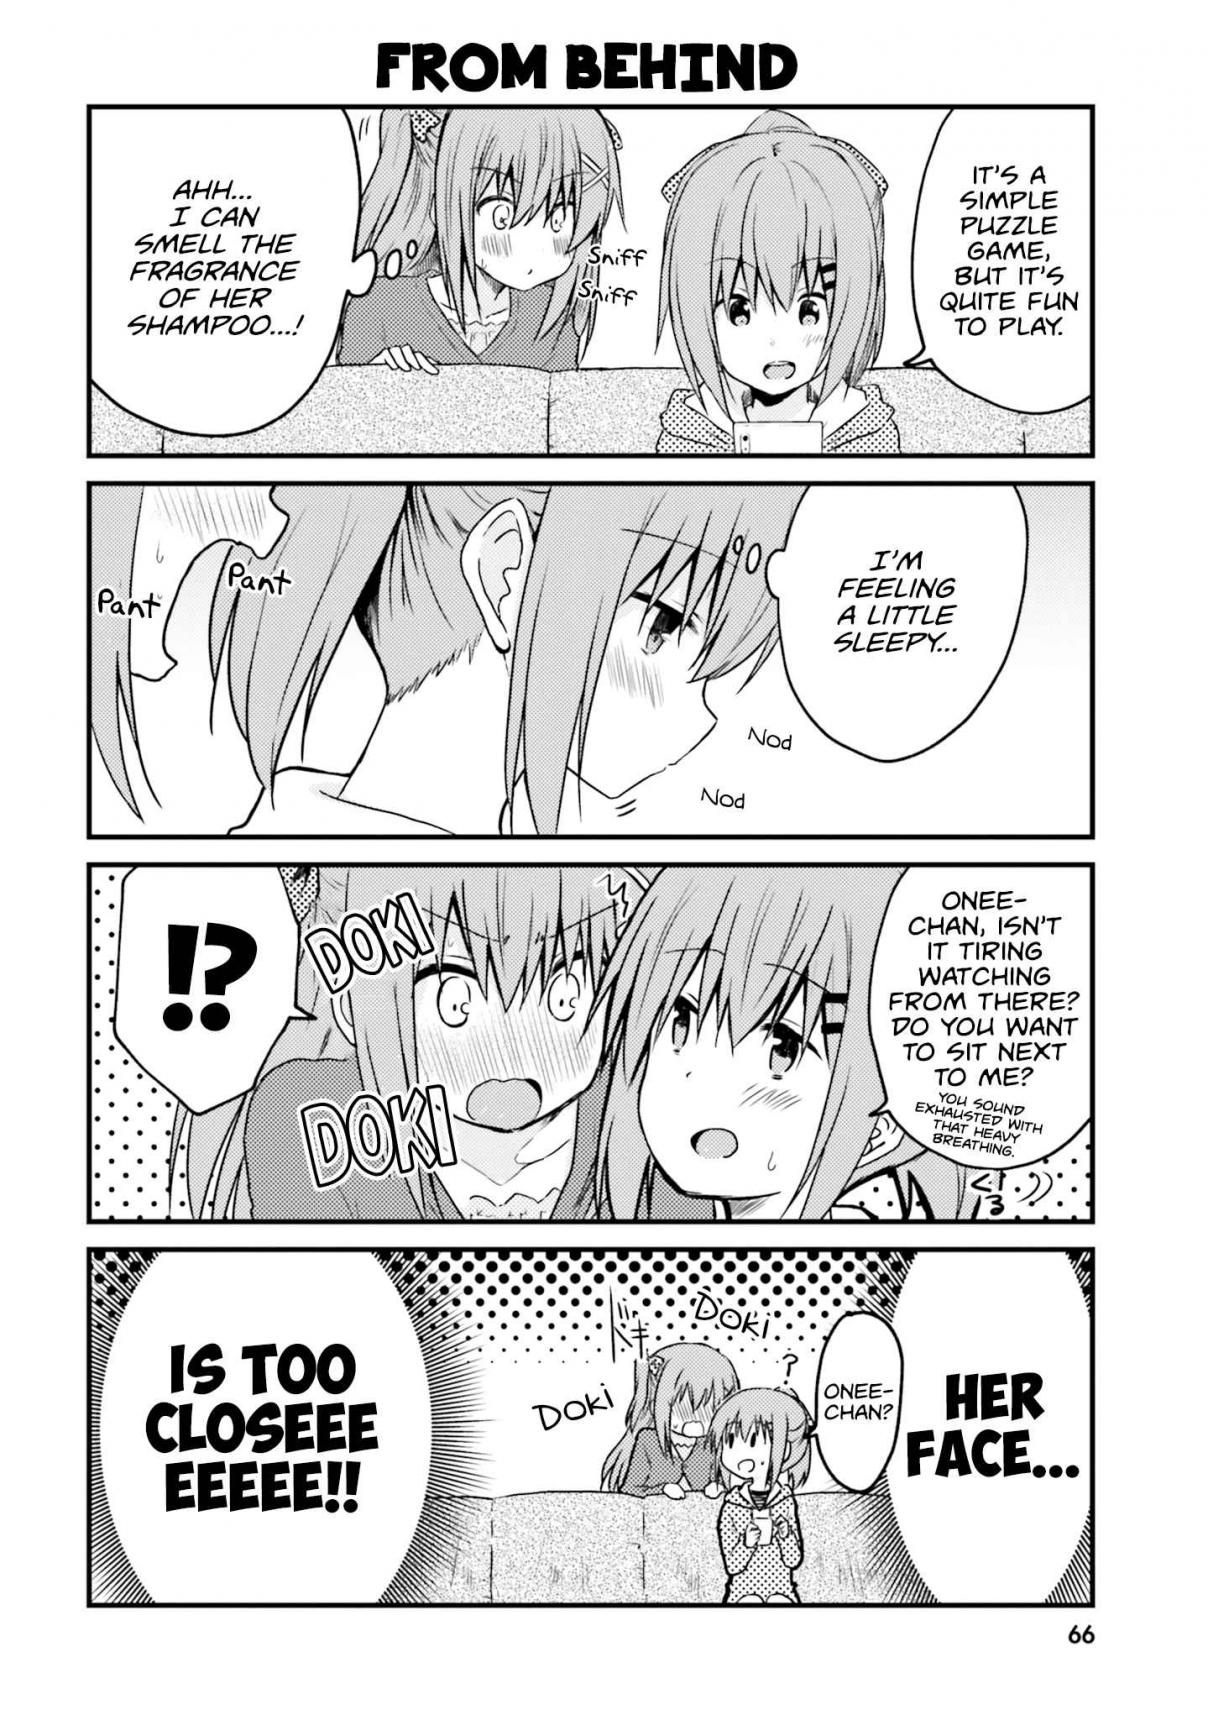 Her Elder Sister Has a Crush on Her, But She Doesn't Mind. Vol. 1 Ch. 5 Siscon Elder Sister and Junior